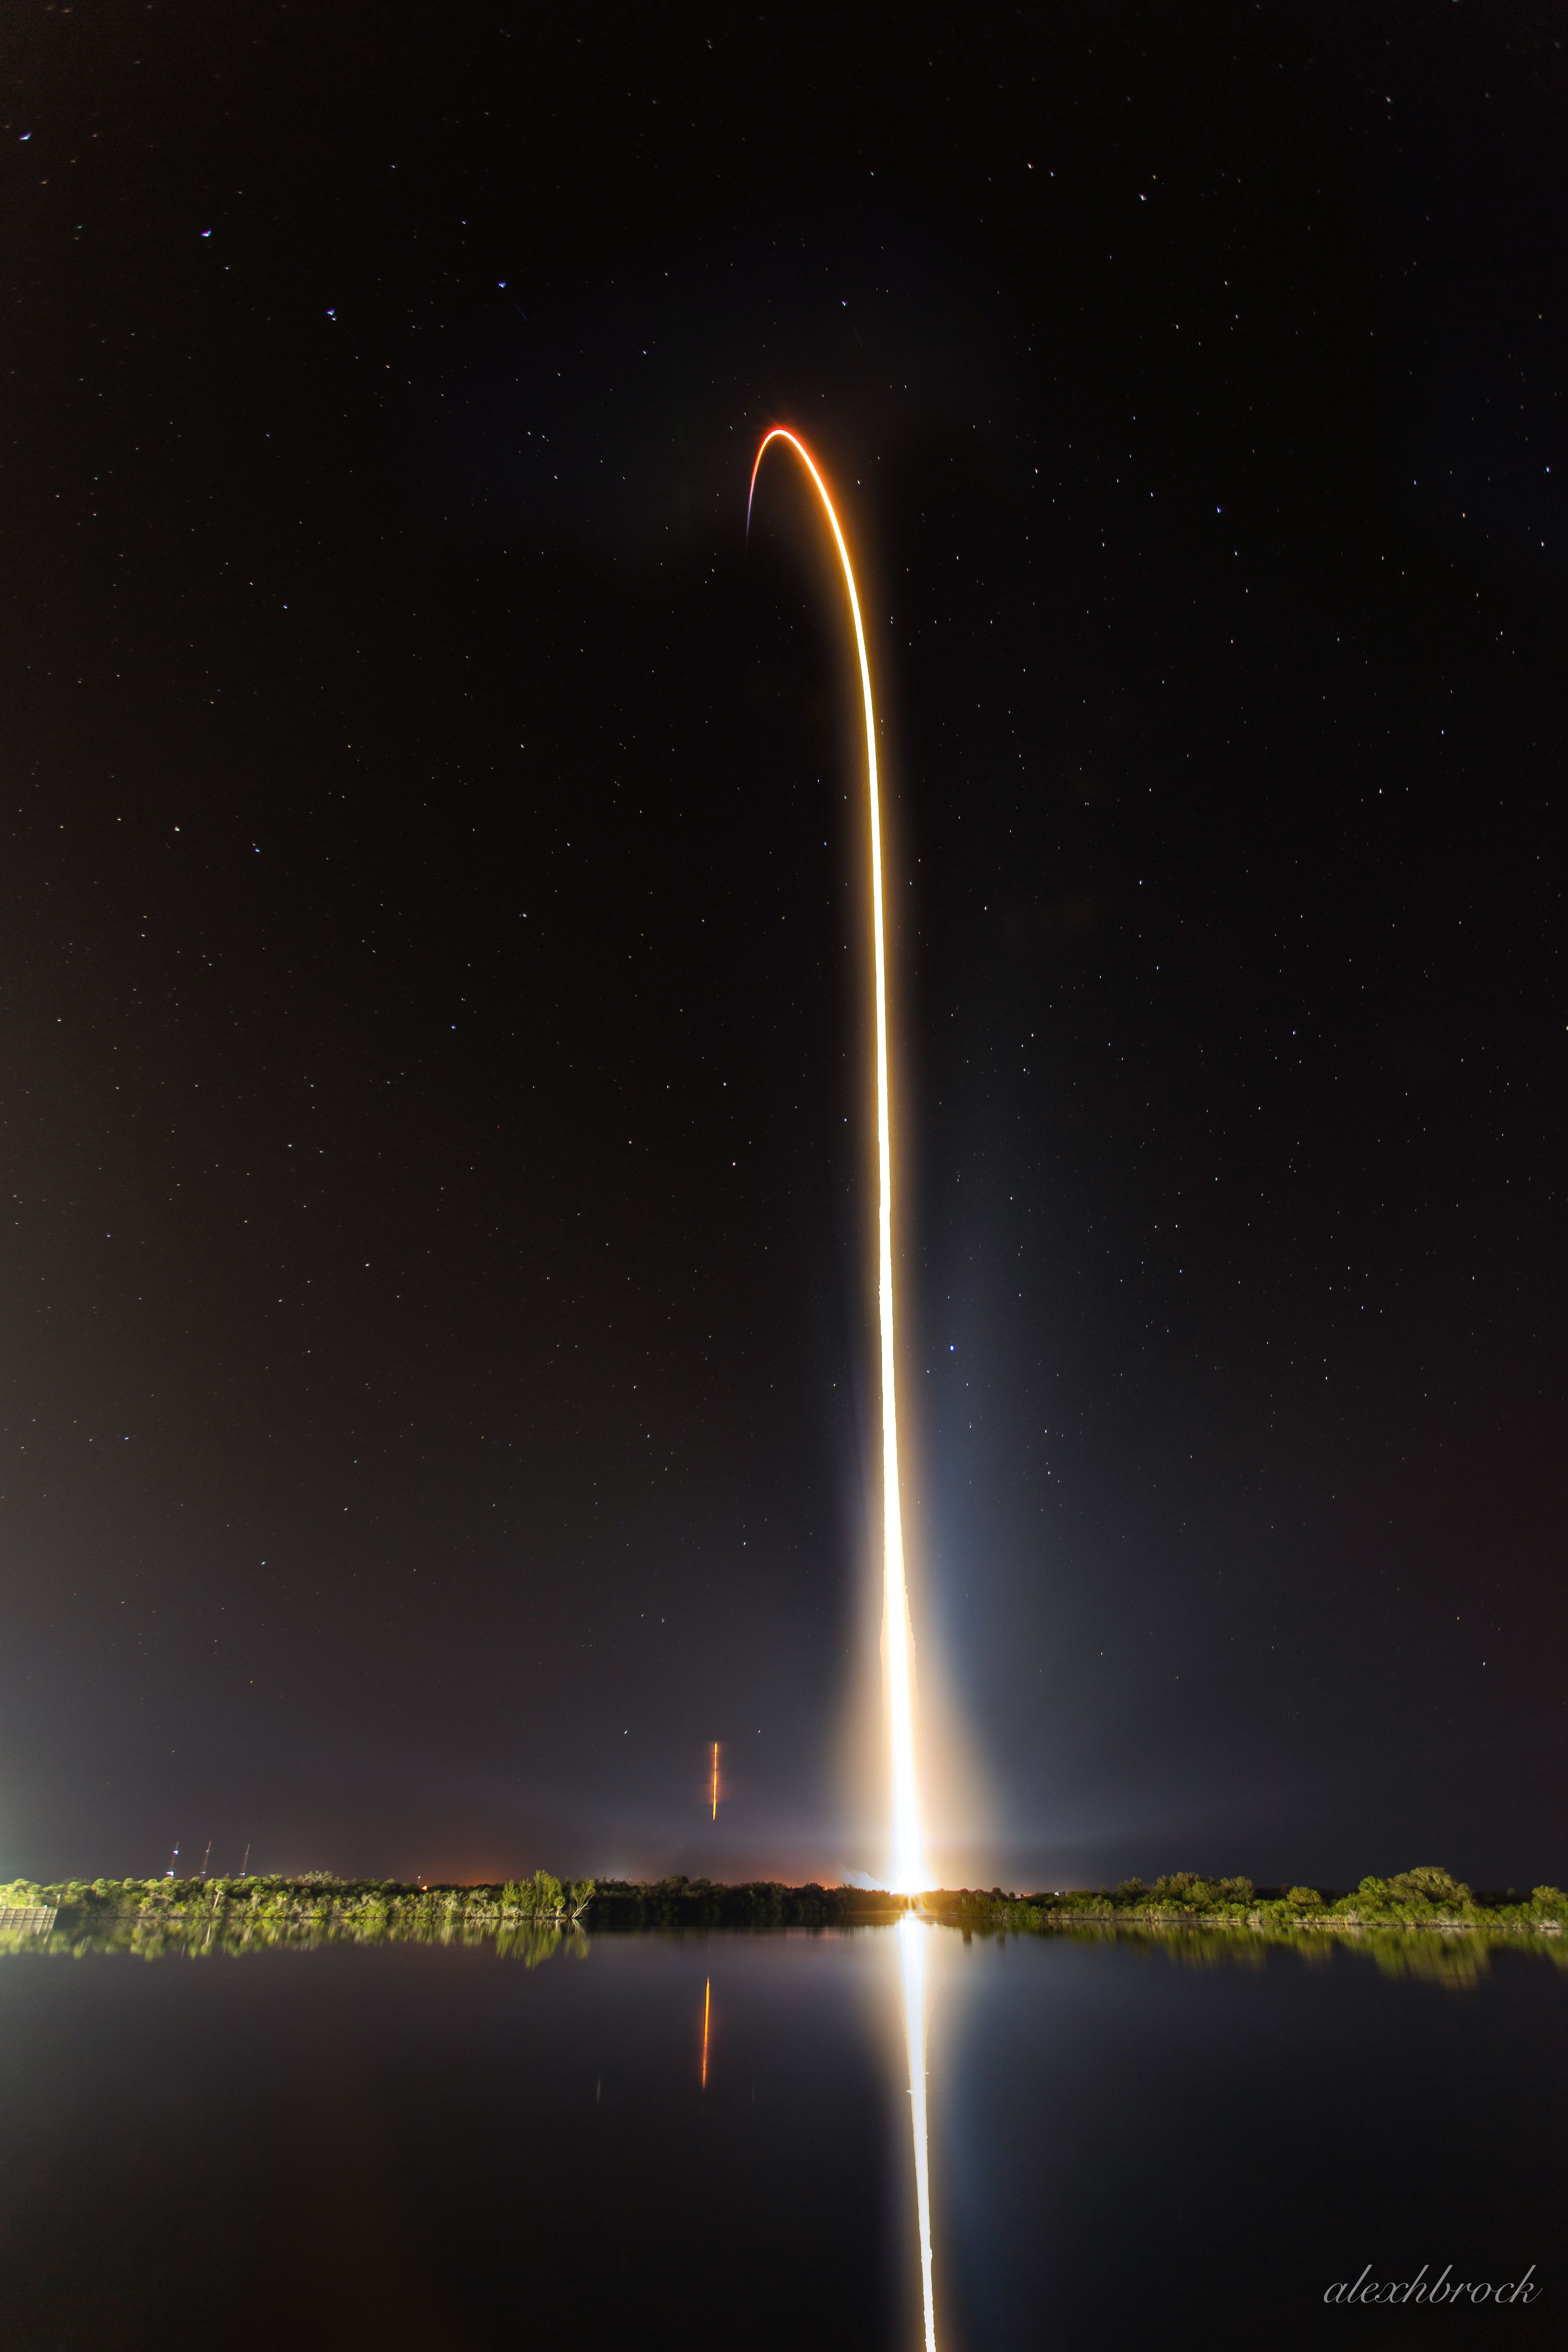 My Long Exposure Of SpaceX Crew Dragon Demo 1 Launch